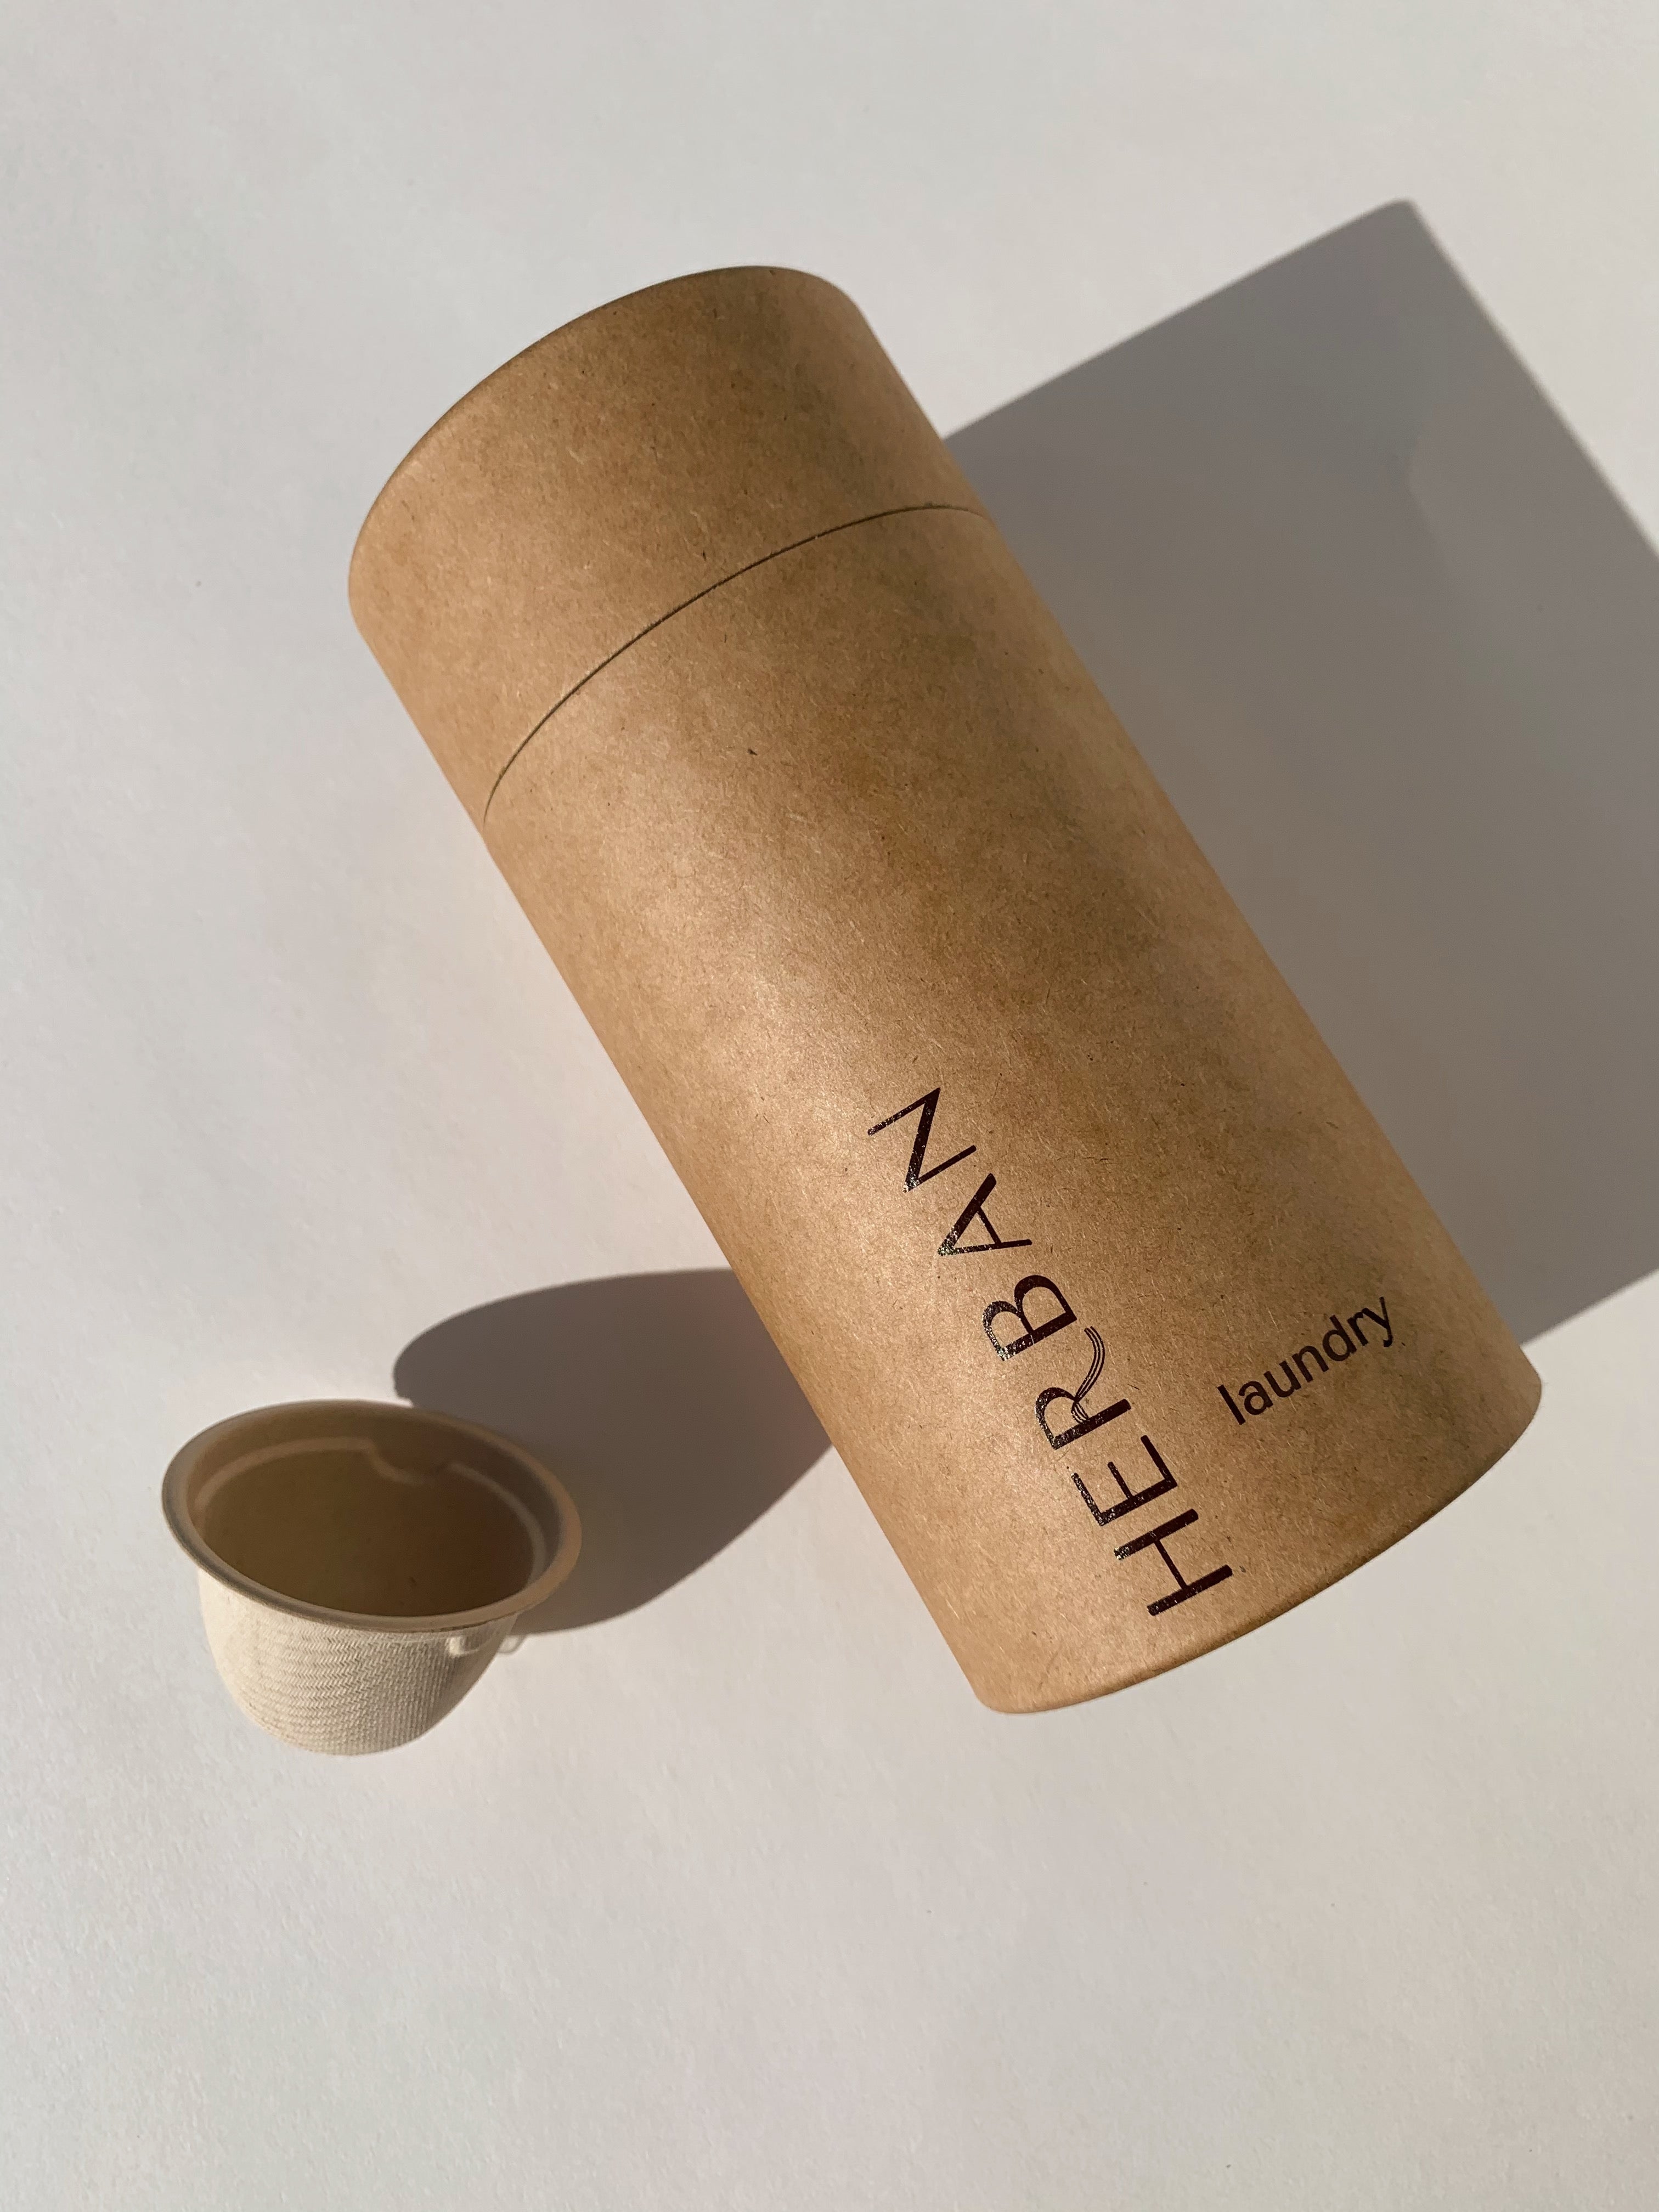 Kraft paper tube imprinted with Herban Laundry